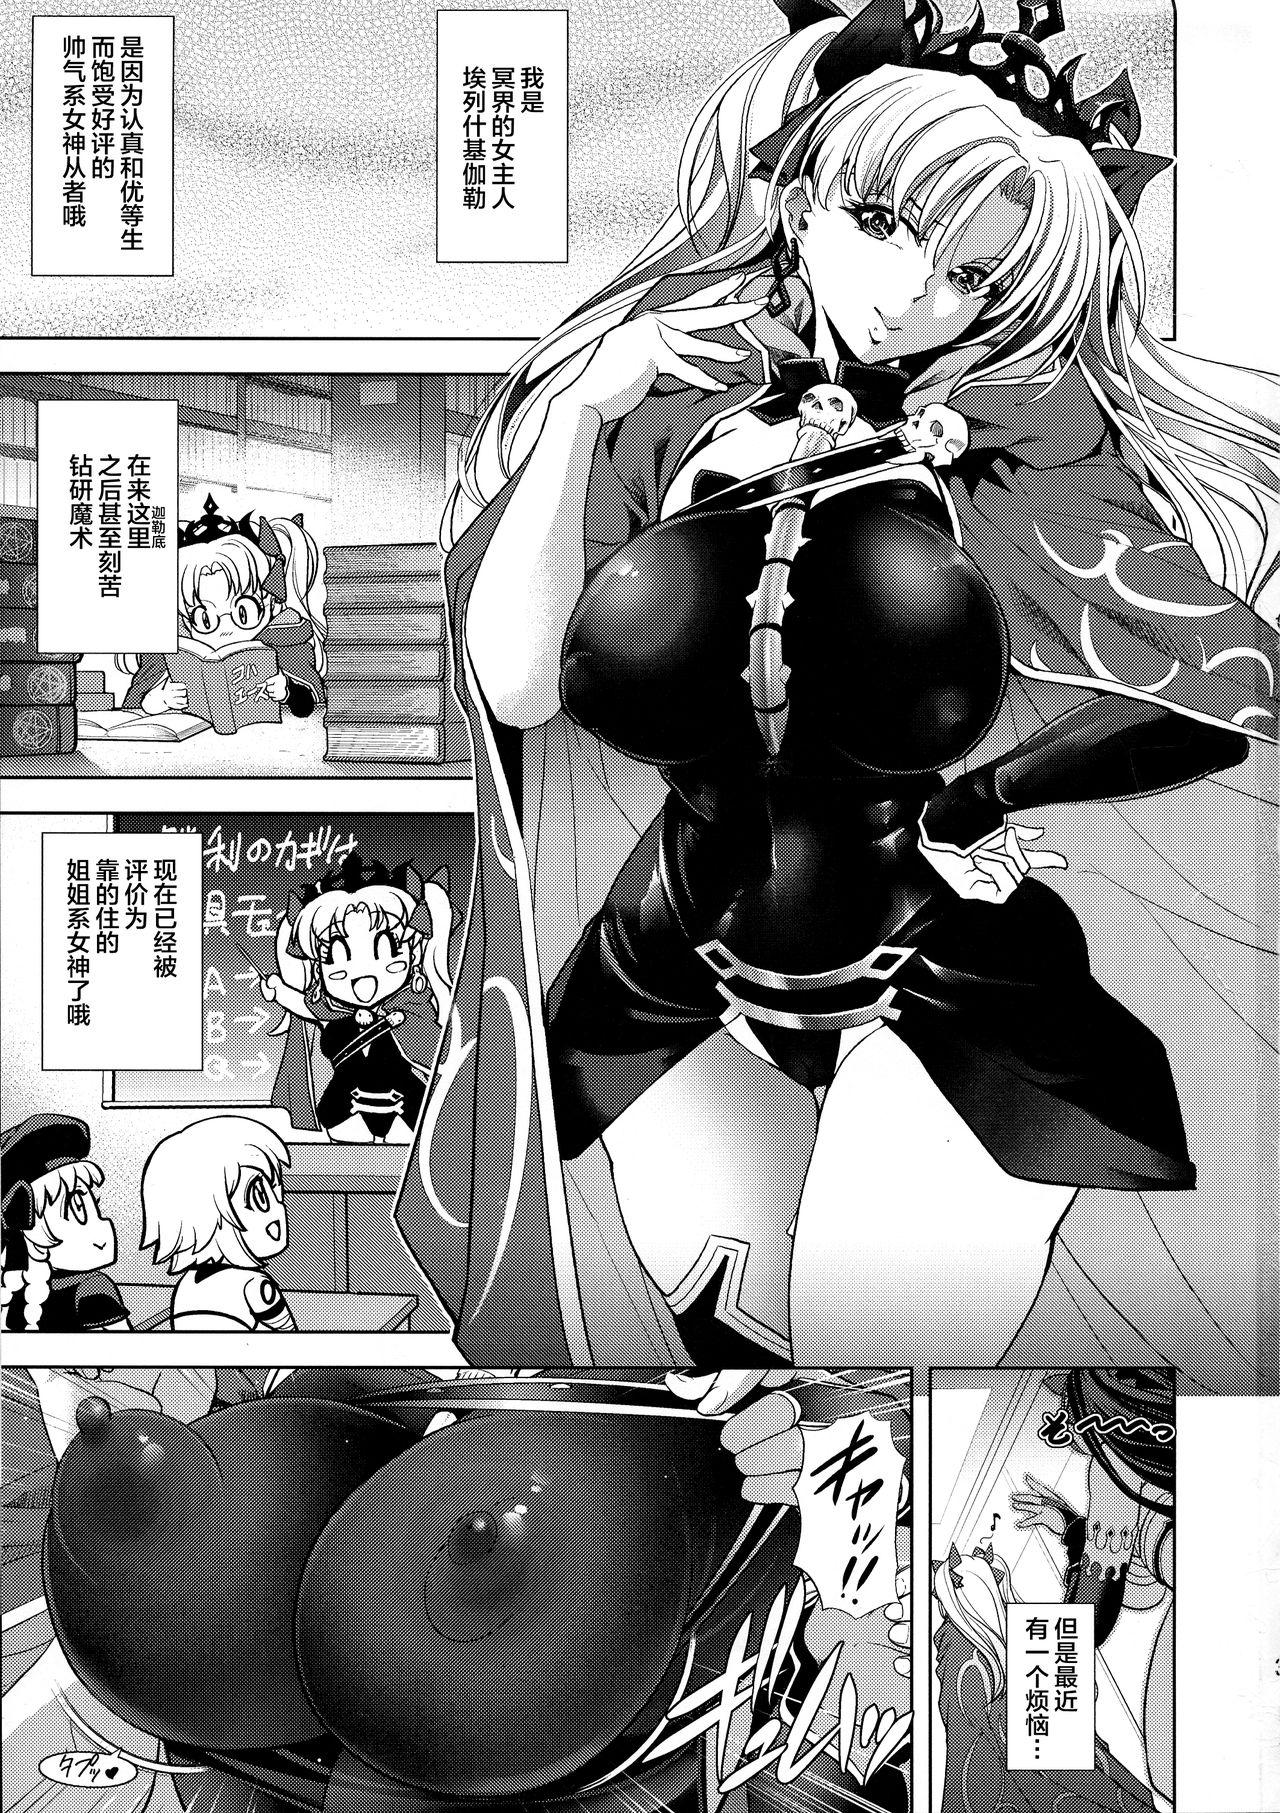 Pervert COMMAND CODE - Fate grand order Tamil - Page 2